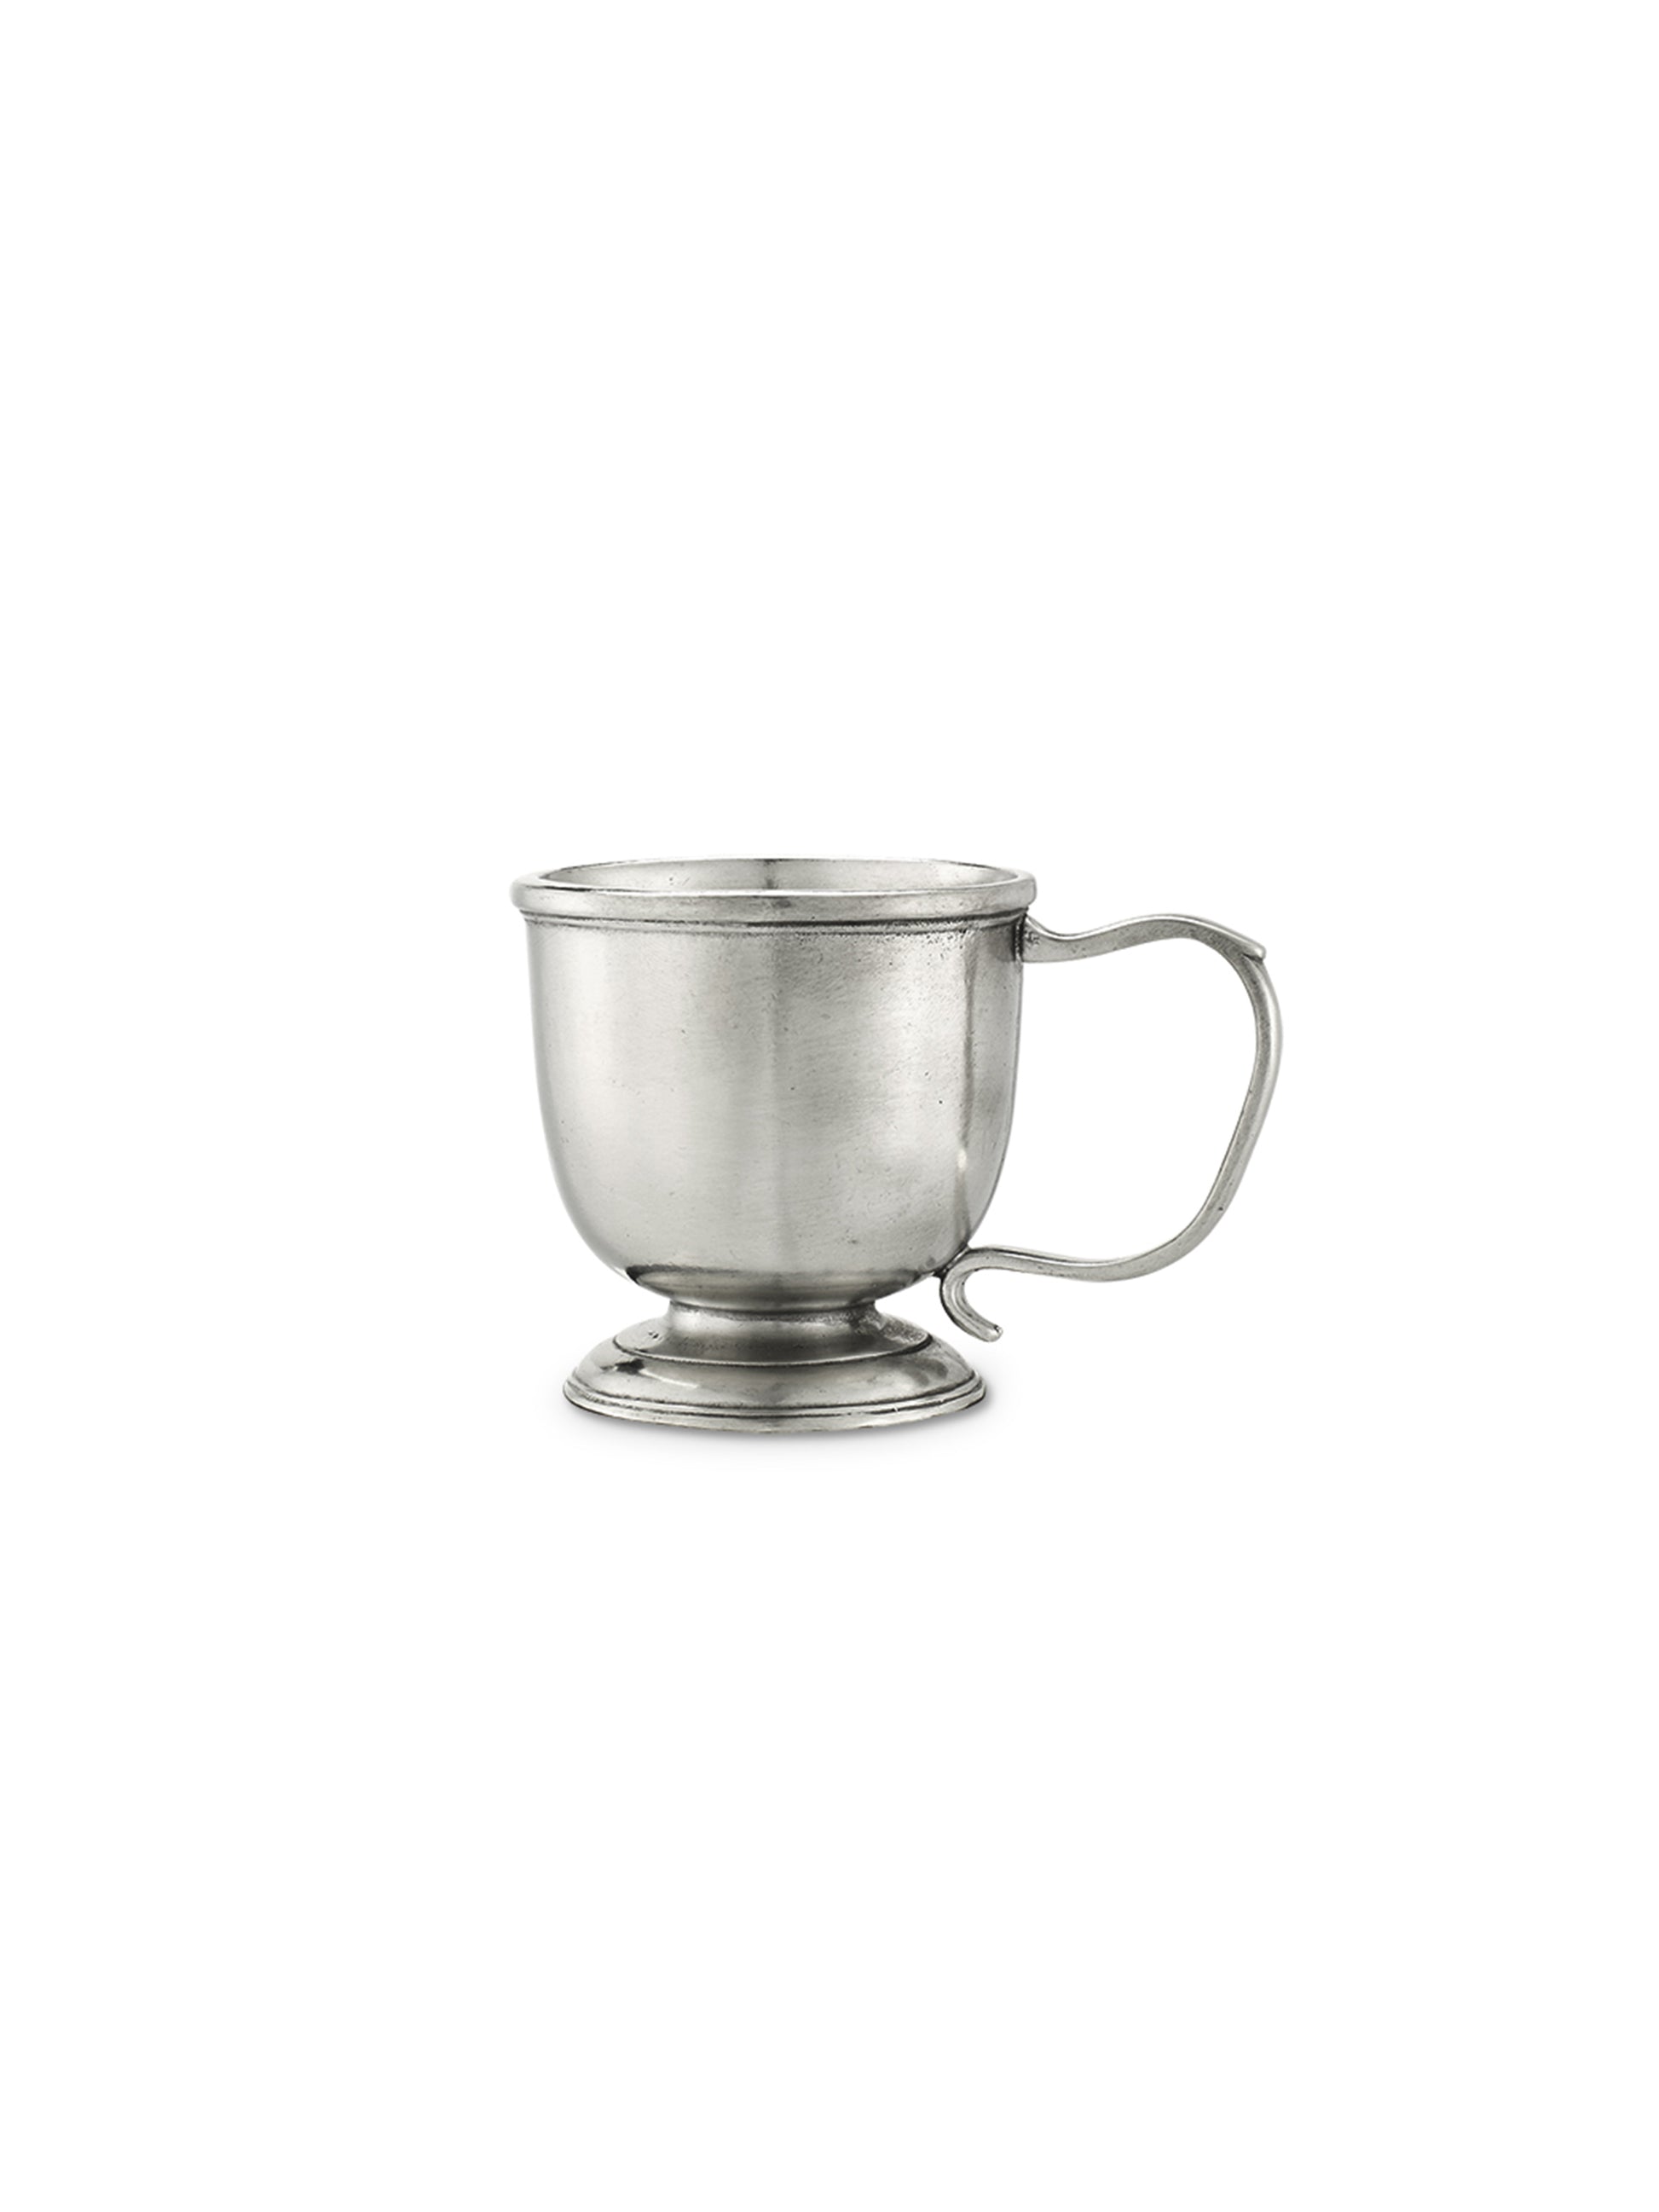 MATCH Pewter Baby Cup